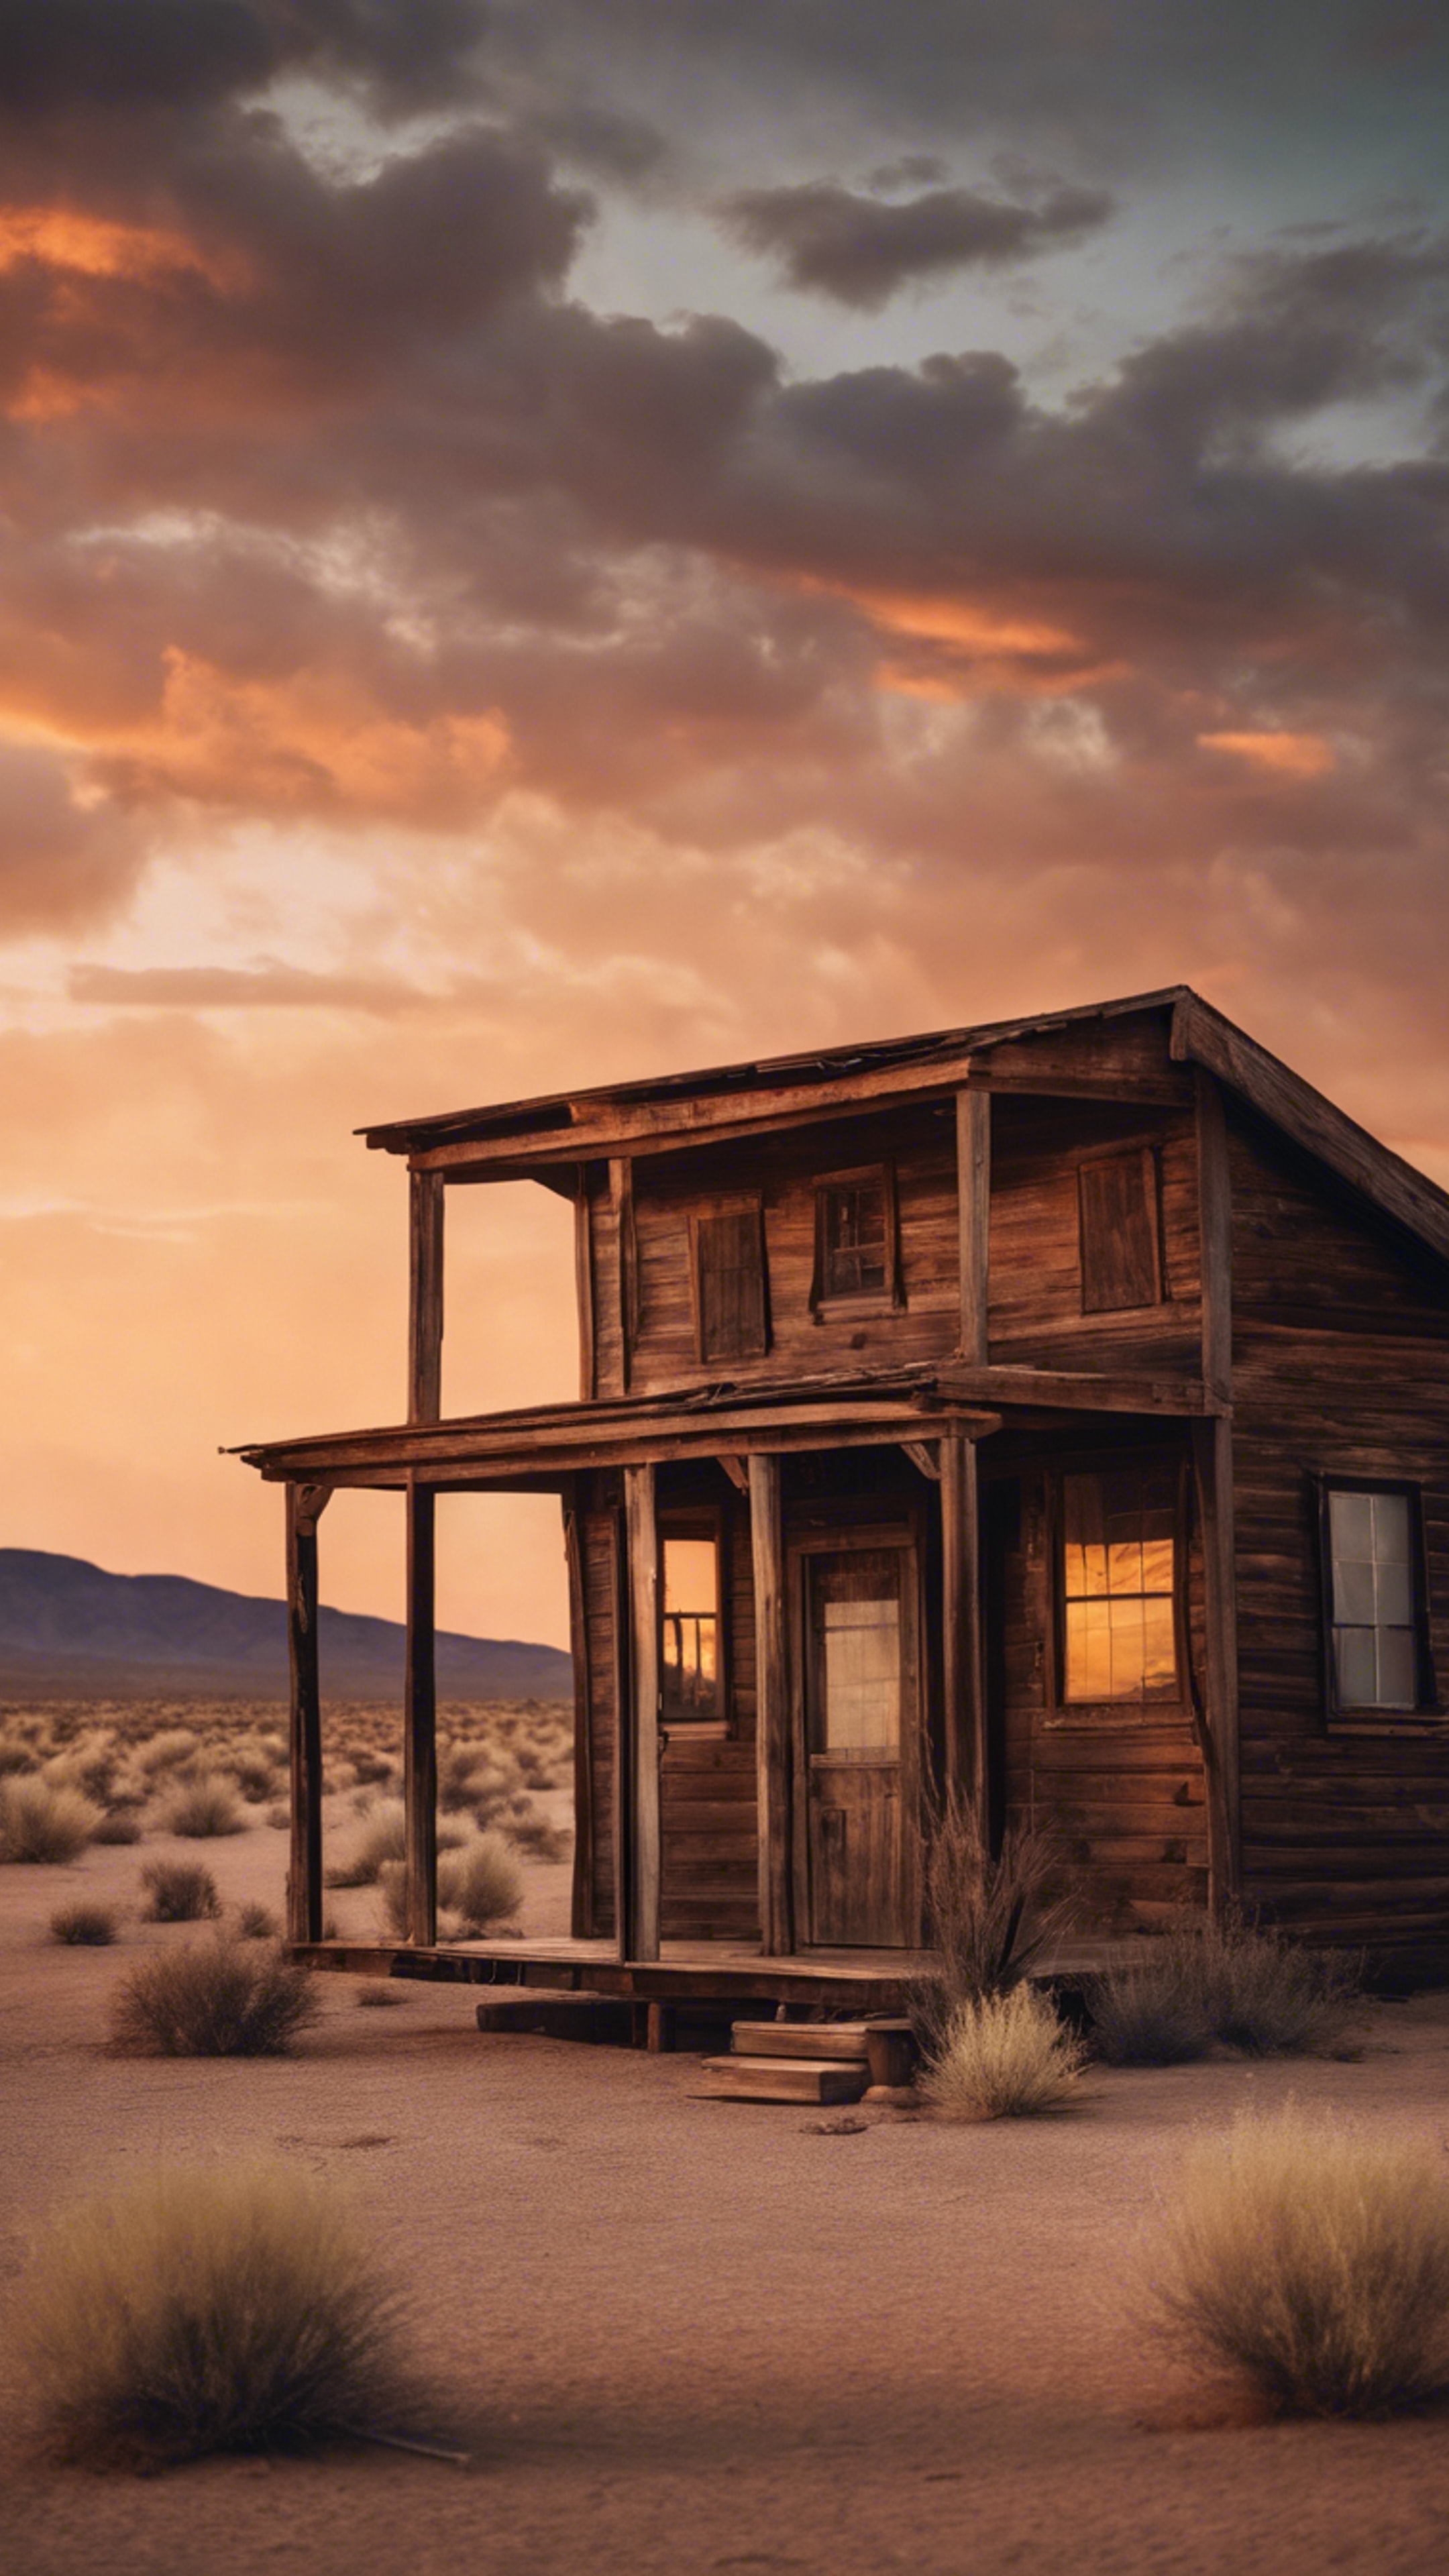 A dust-swept desert scene with a lone cabin standing resiliently during a blazing sunset in the wild west. 墙纸[55ae6b4a2ff440e59218]